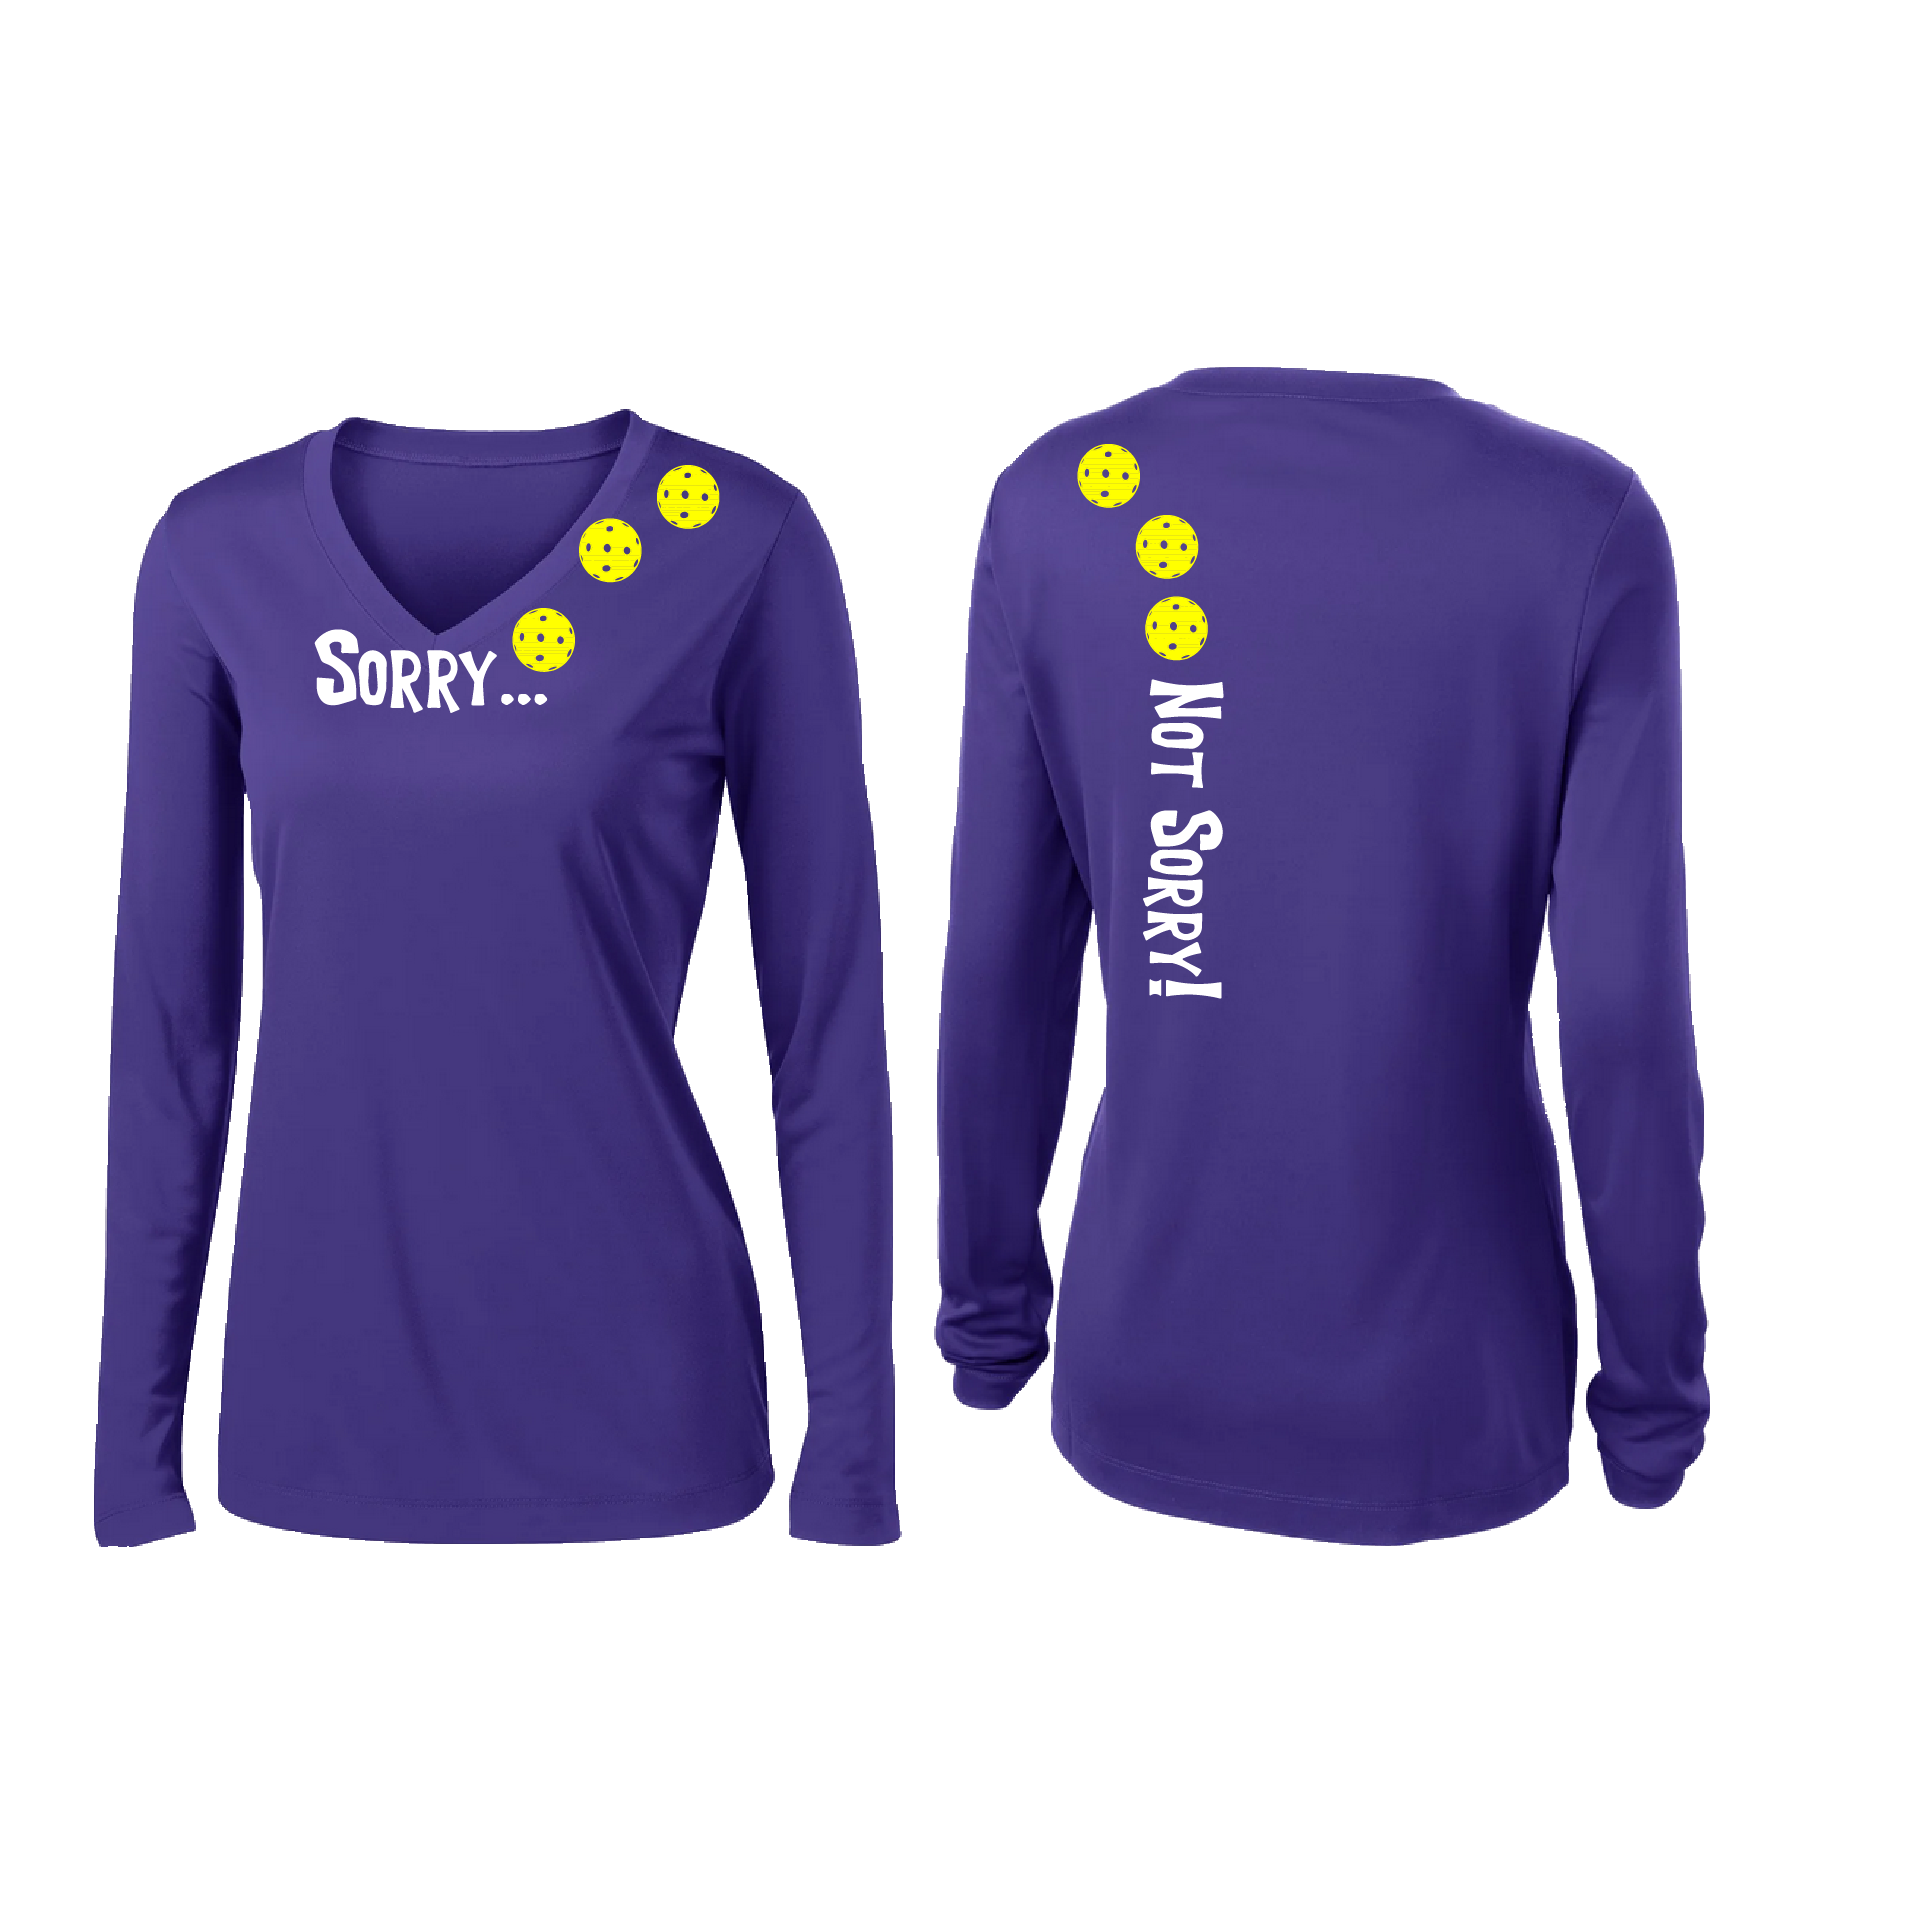 Pickleball Design: Sorry...Not Sorry with Customizable Ball Color – White, Yellow or Pink Balls Women's Styles: Long-Sleeve V-Neck Turn up the volume in this Women's shirt with its perfect mix of softness and attitude. Material is ultra-comfortable with moisture wicking properties and tri-blend softness. PosiCharge technology locks in color. Highly breathable and lightweight.